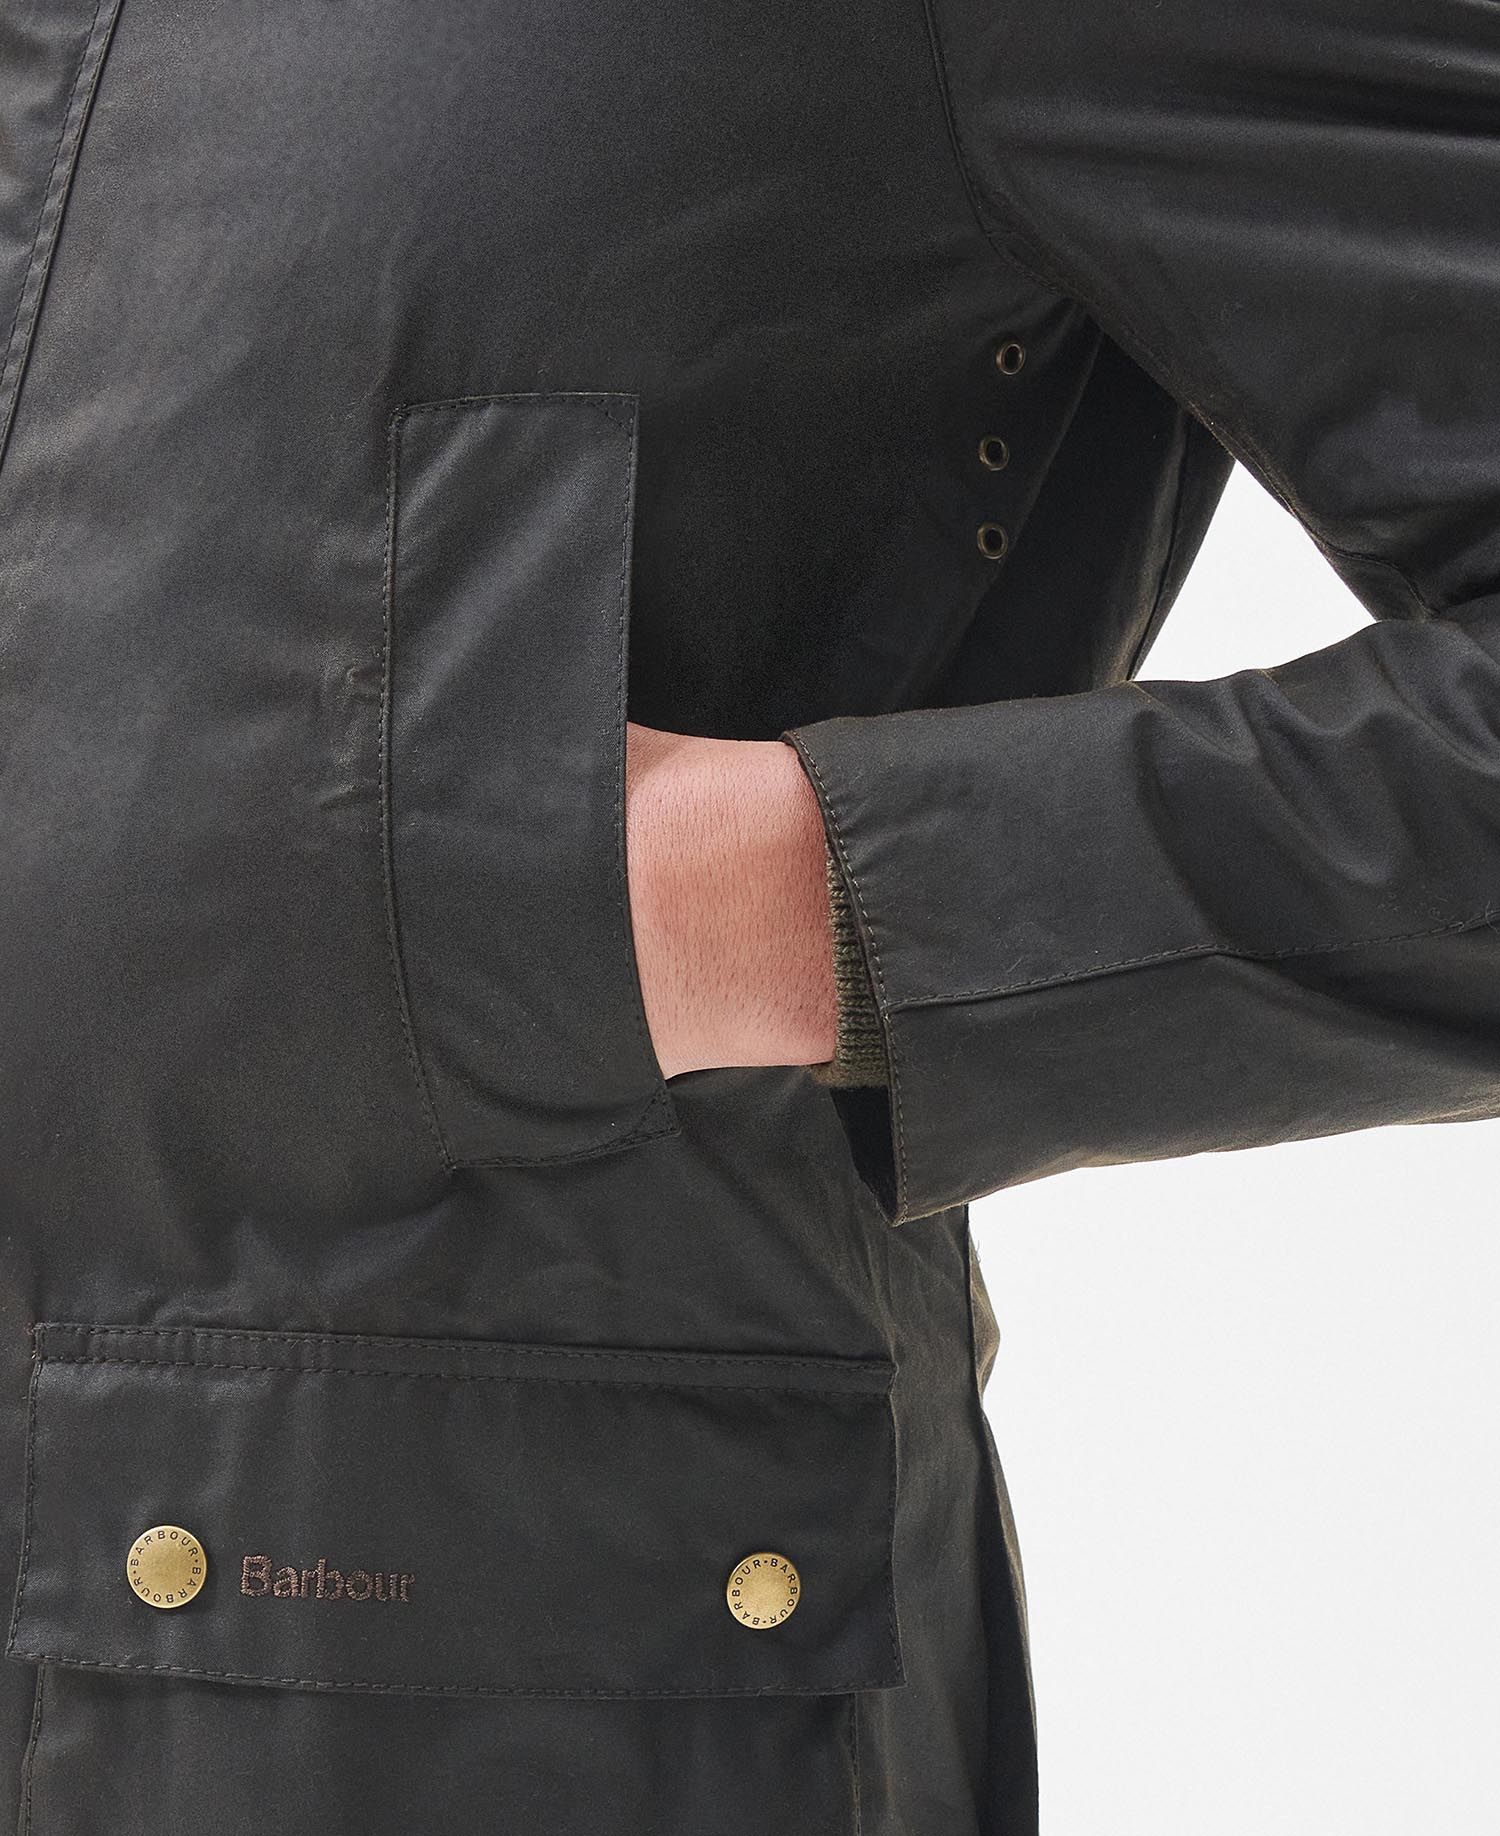 Barbour Ashby Wax Jacket Olive - Esquire Clothing